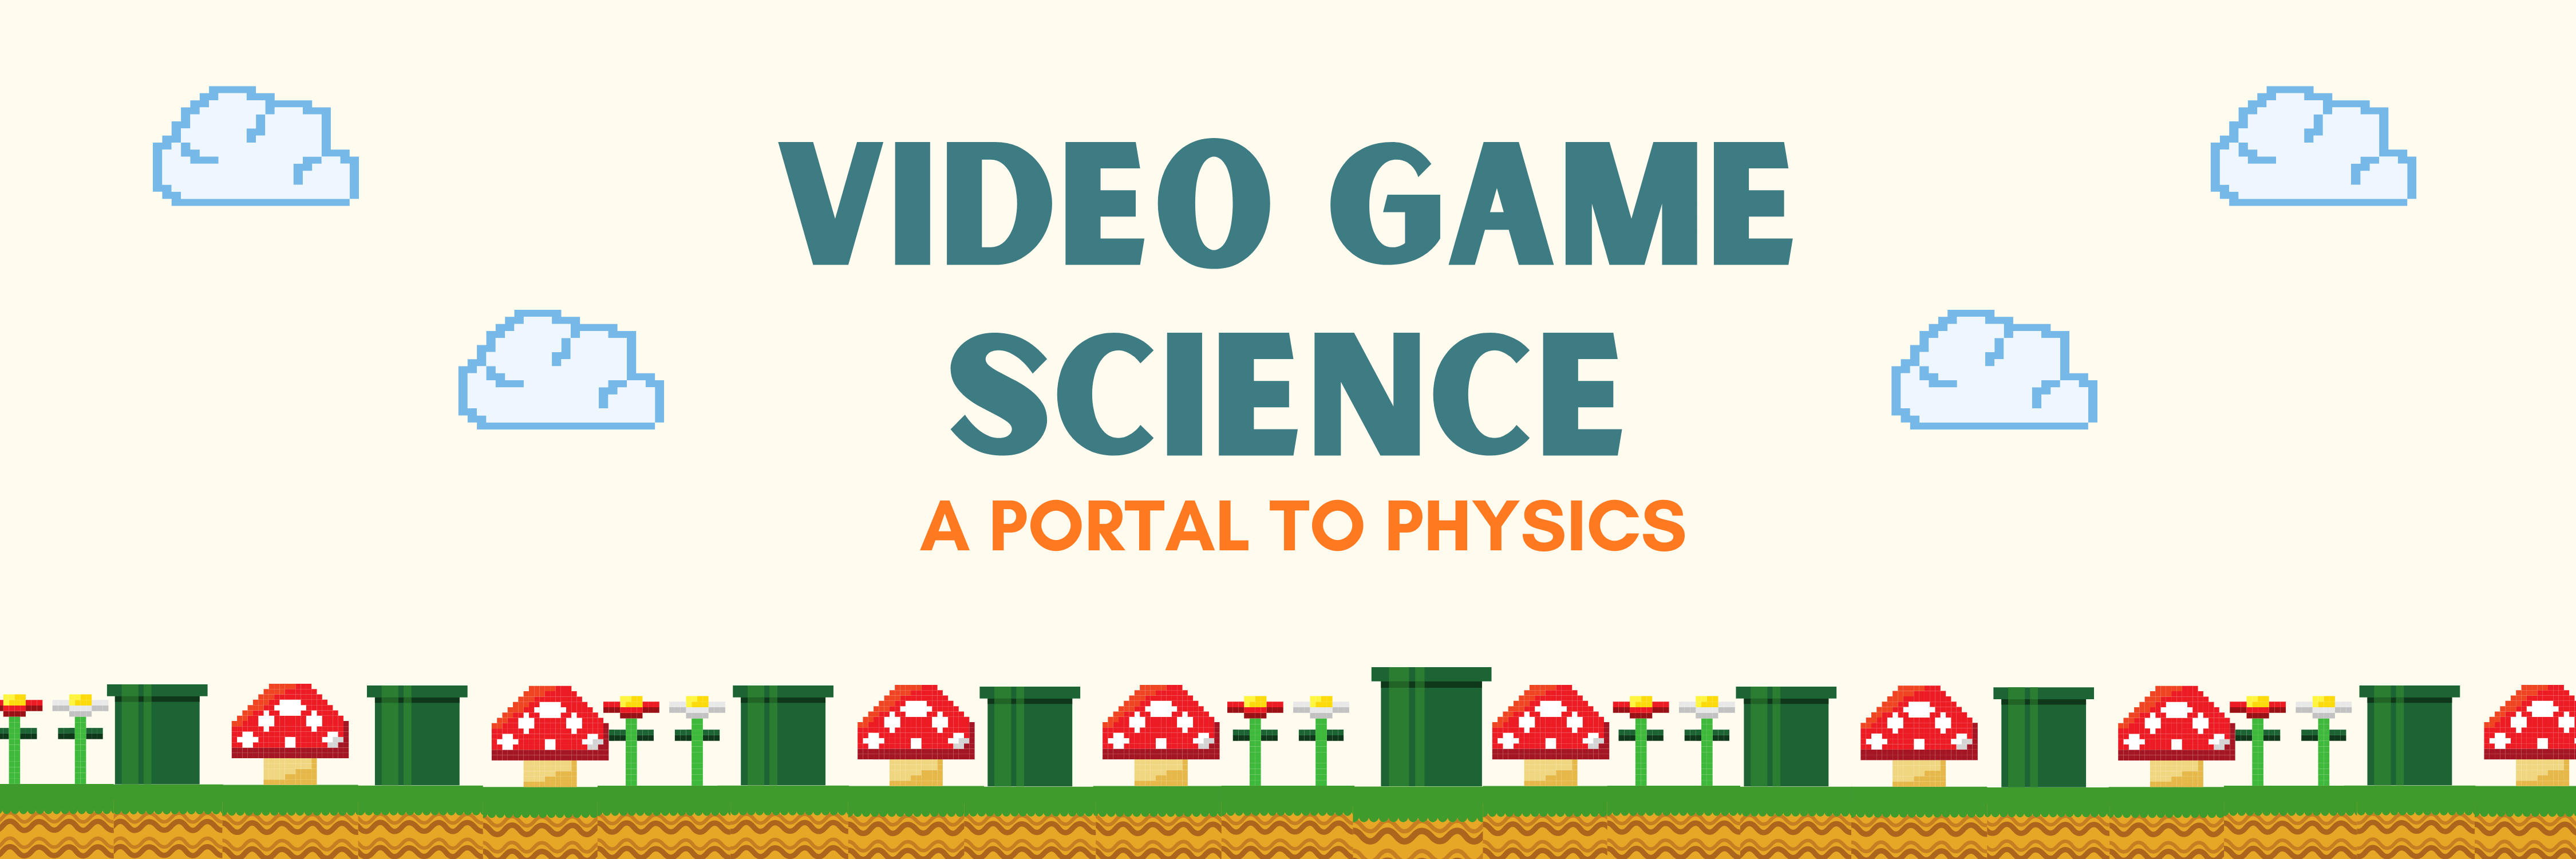 Video Game Science